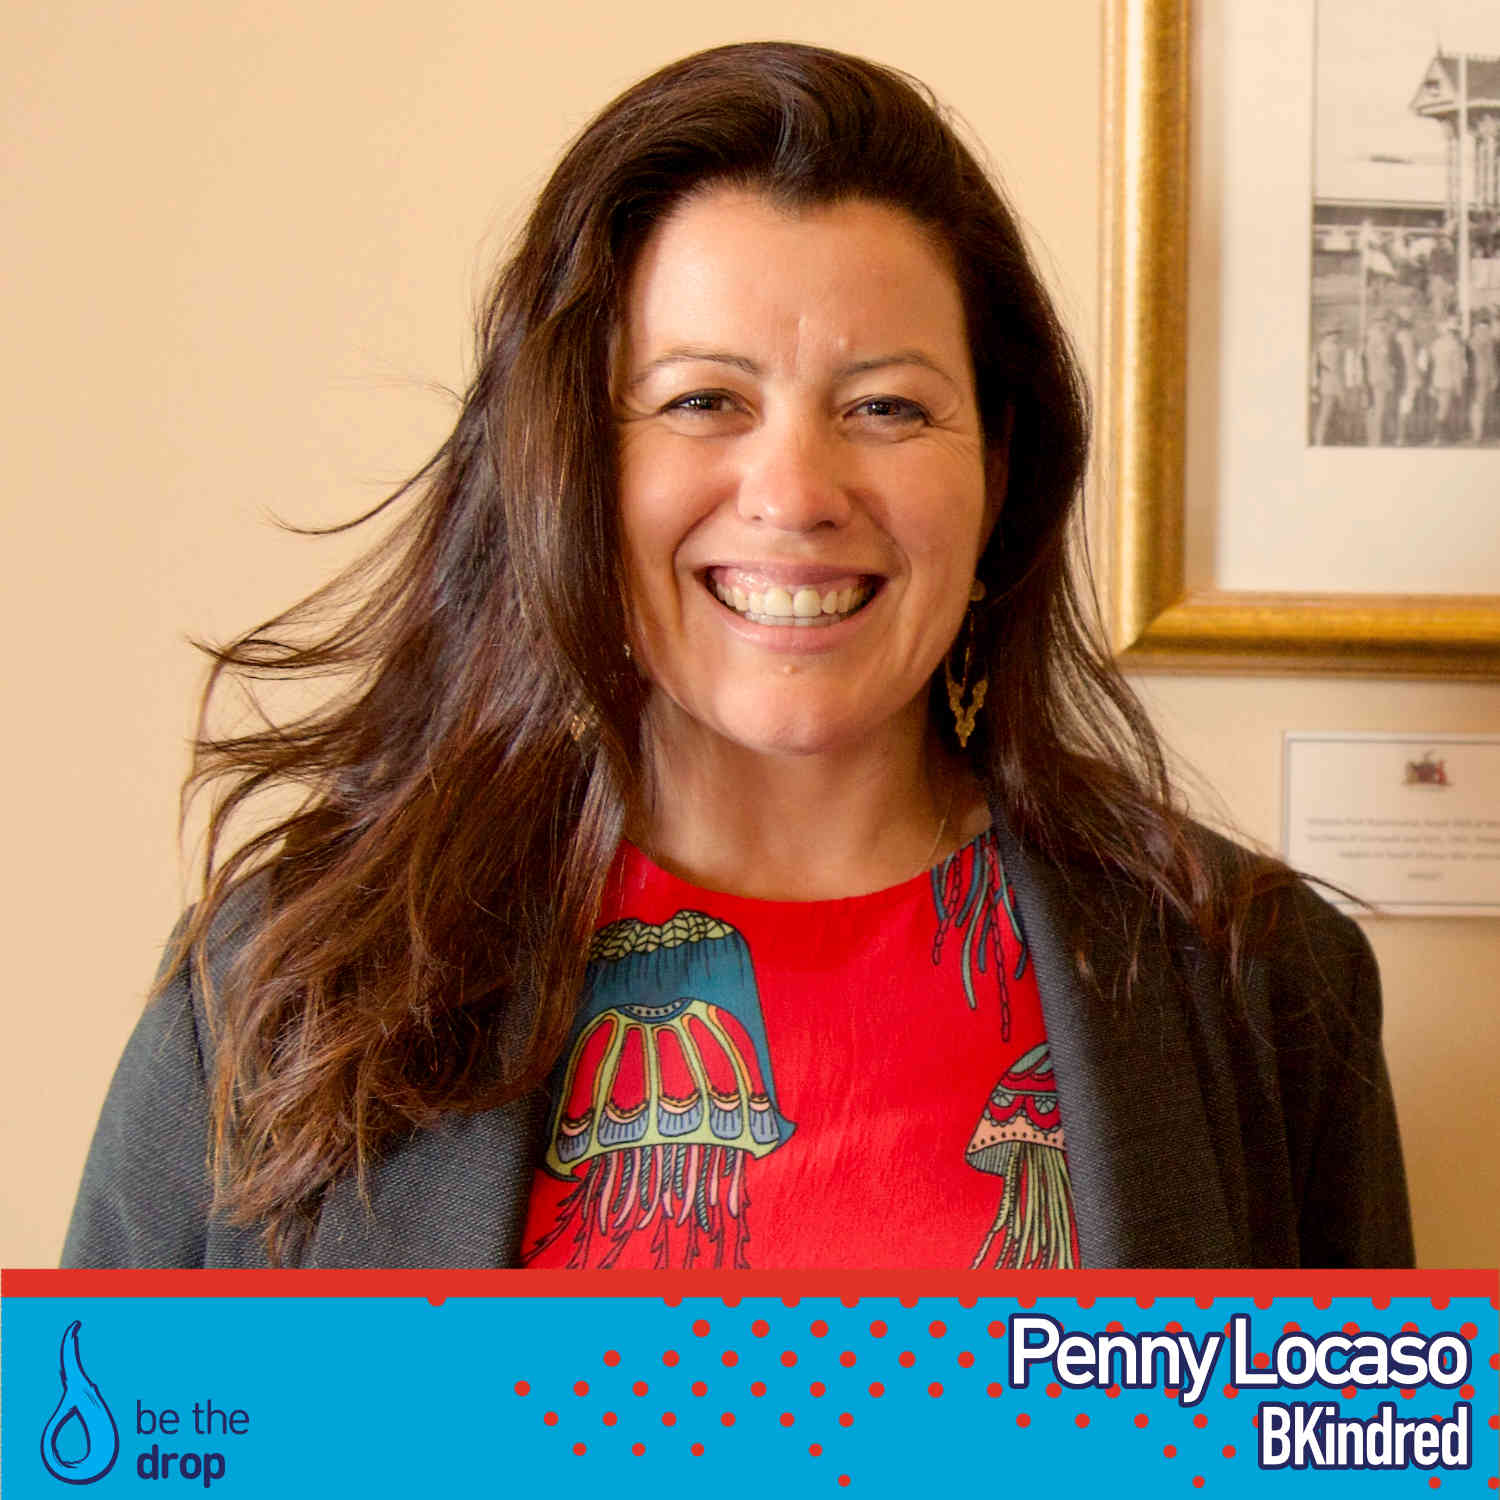 Future Proof Your Business With Penny Locaso